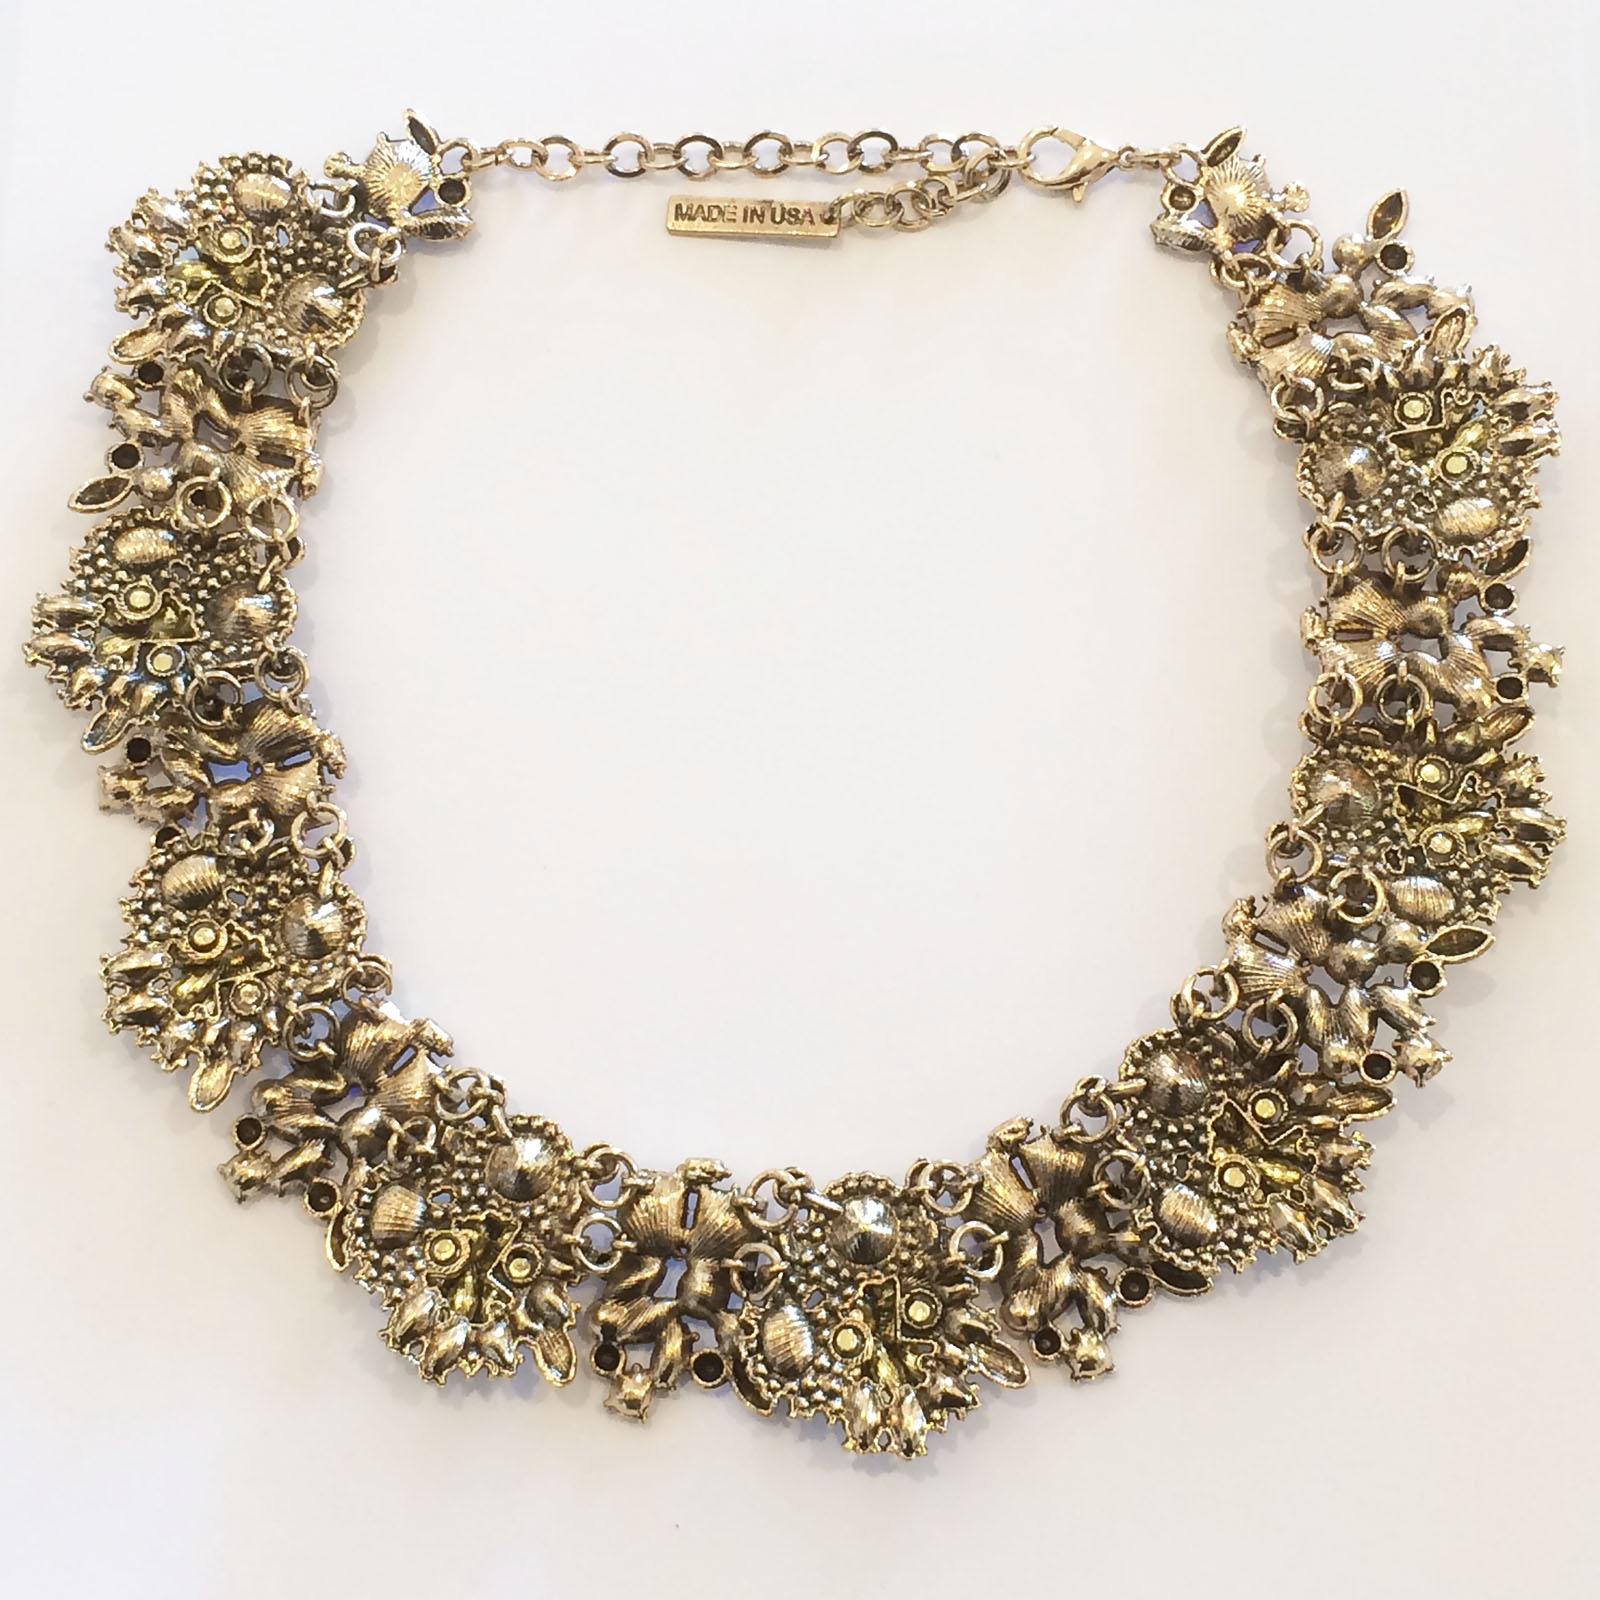 Genuine Oscar De La Renta Royal Party Necklace. A stunning array of amazing colours, shapes and phenomenal design application, set on a gilt background. Colours of Amethyst, Citrine, Blue Sapphire, Aquamarine, Moonstone, Peridot, Gilt objects,